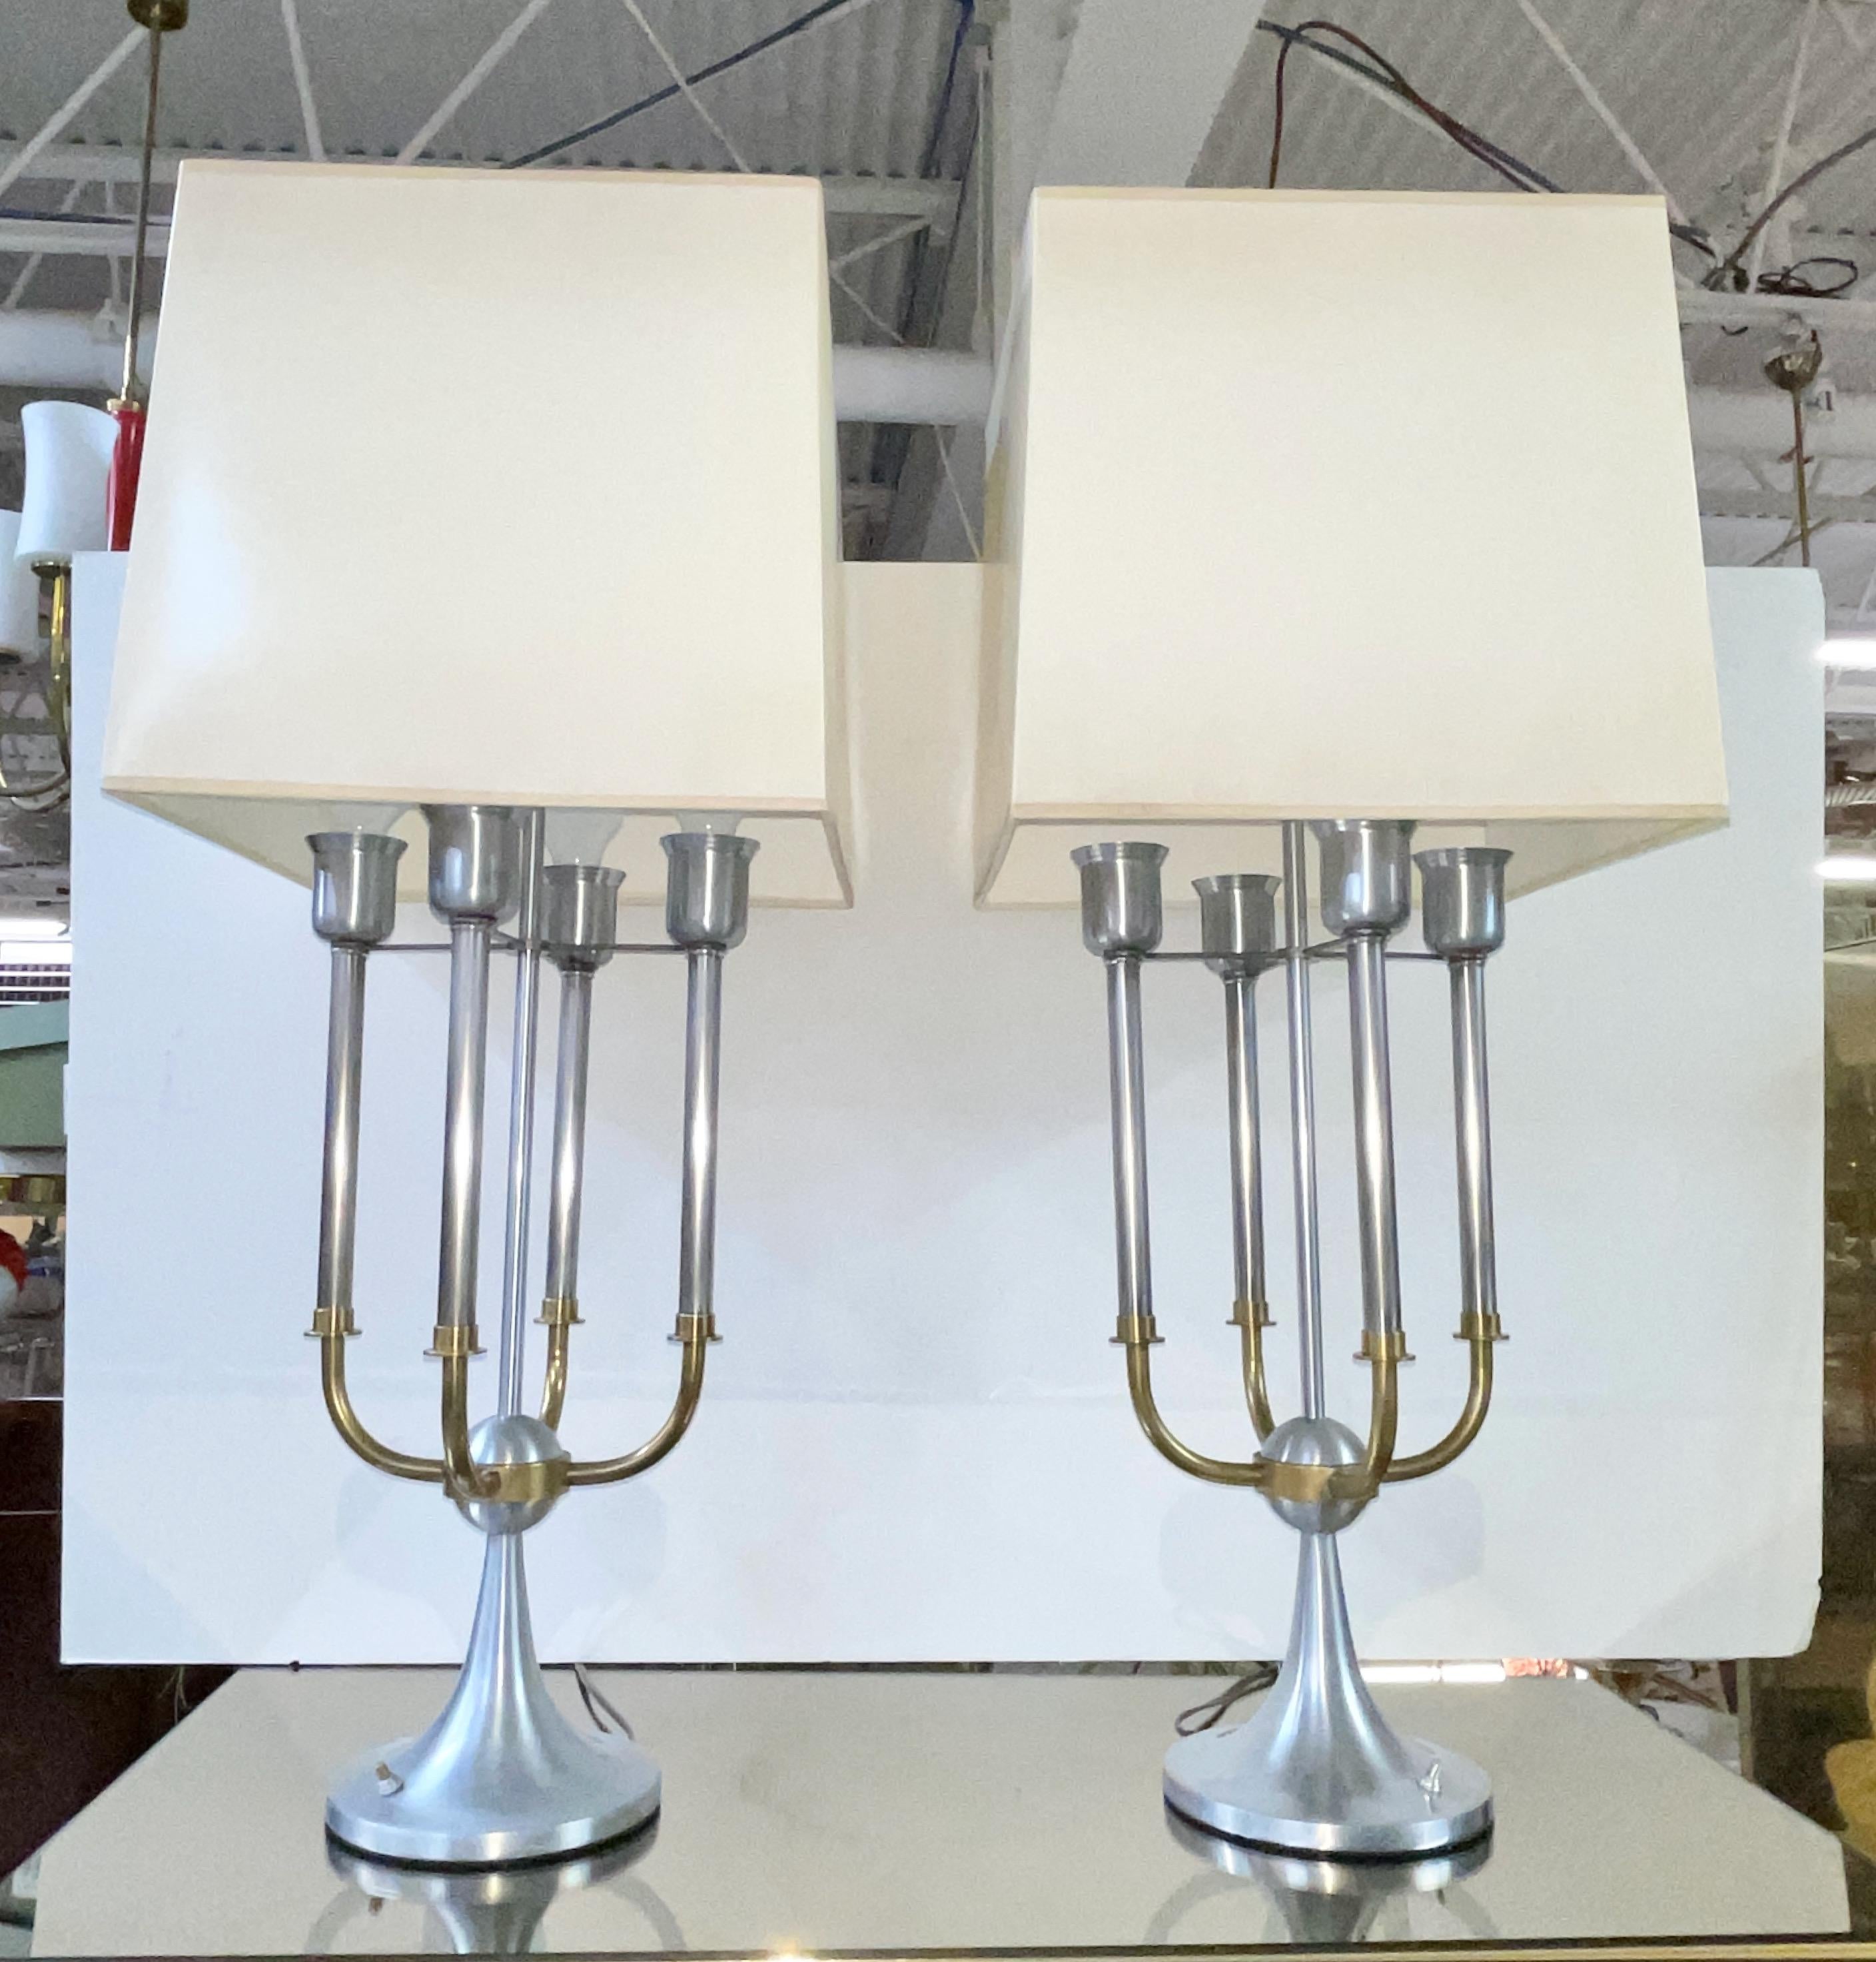 Very well crafted pair of modernist bouillotte lamps in brushed nickel and solid brass, each with four light candelabra, with brass arms extending from a central orb atop a round flared tulip base and an elongated stem reaching 33.5 inches high to a